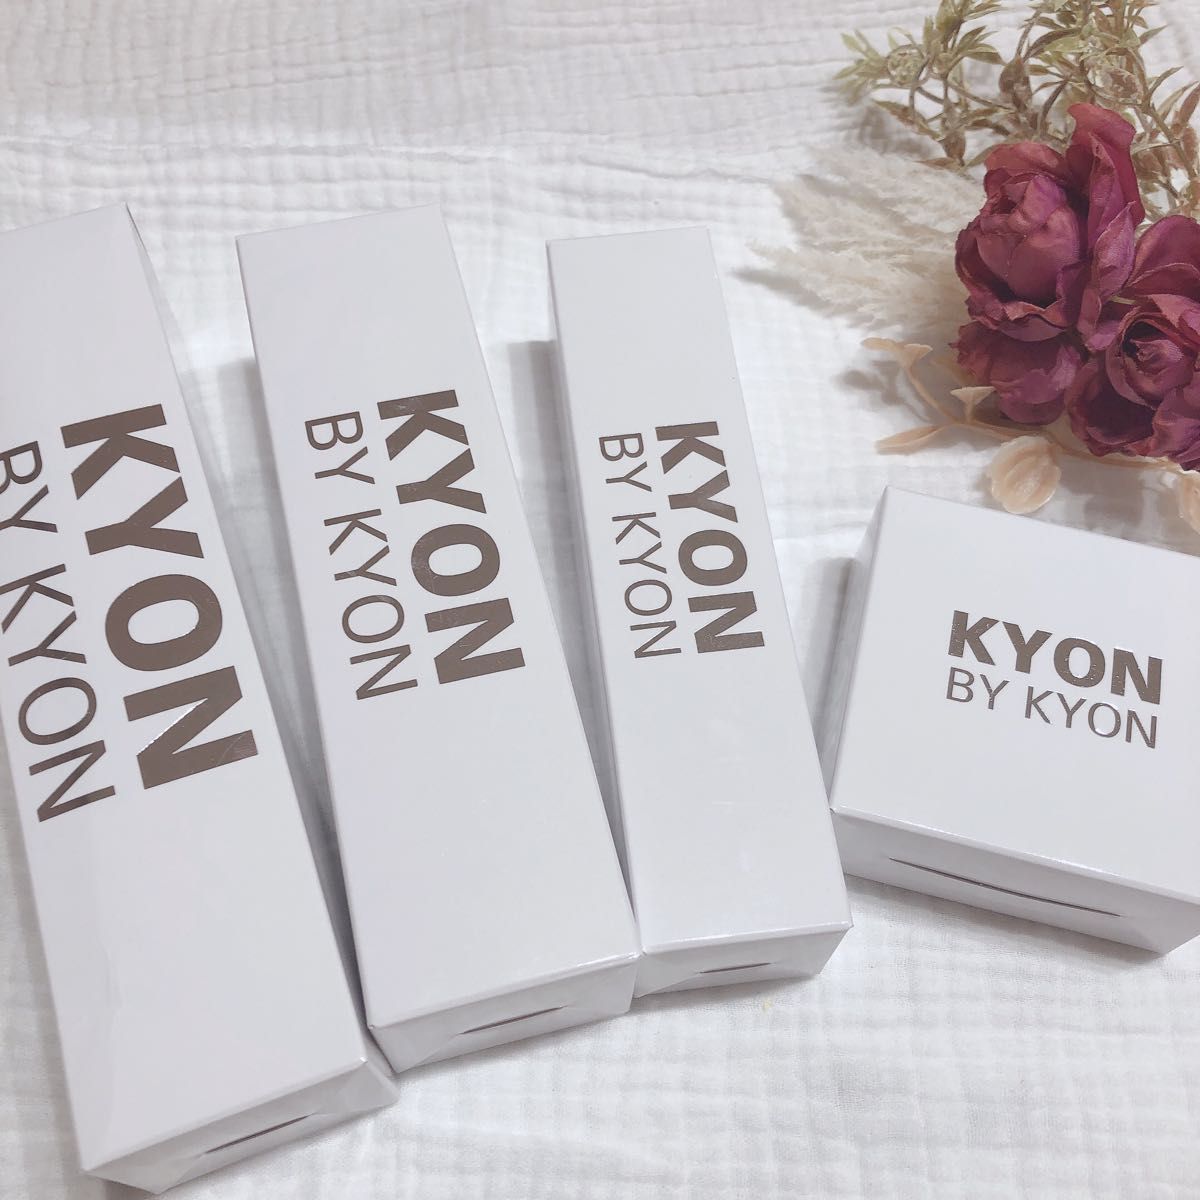 KYON BY KYON キョンバイキョン スキンケア4点セット 新品未使用・未開封品